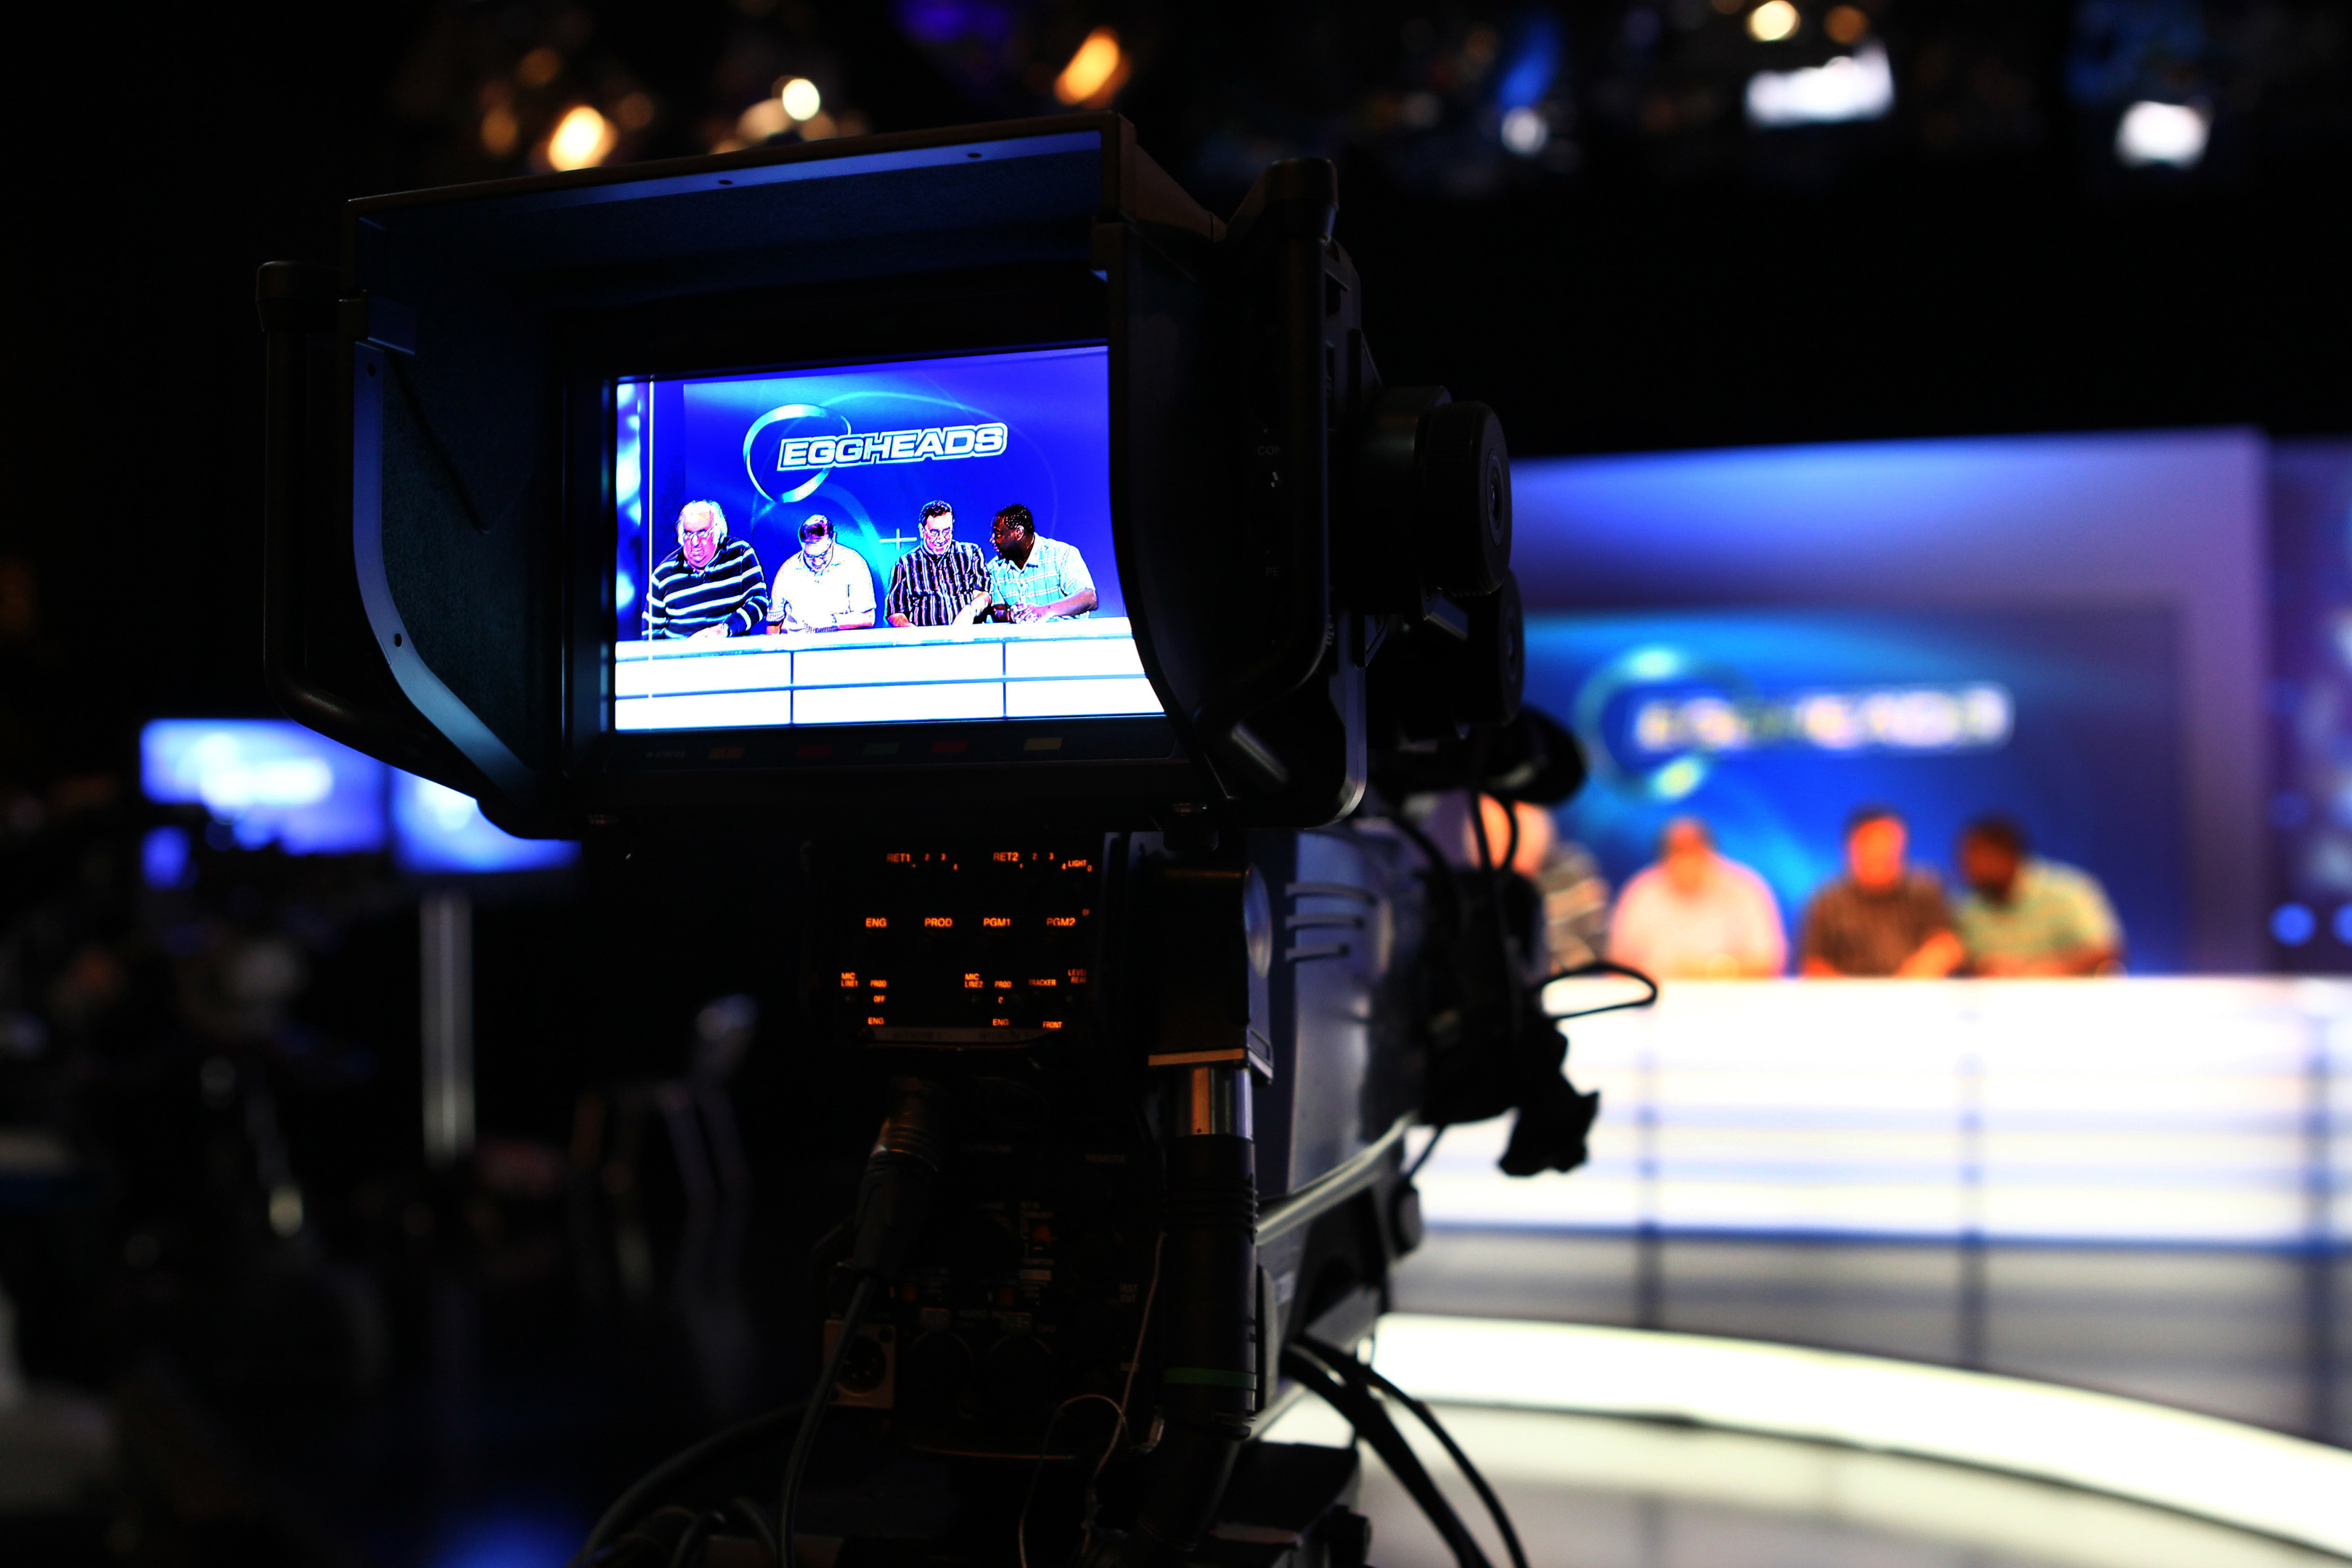 Mr Clark would love to become a regular on BBC's Eggheads show.